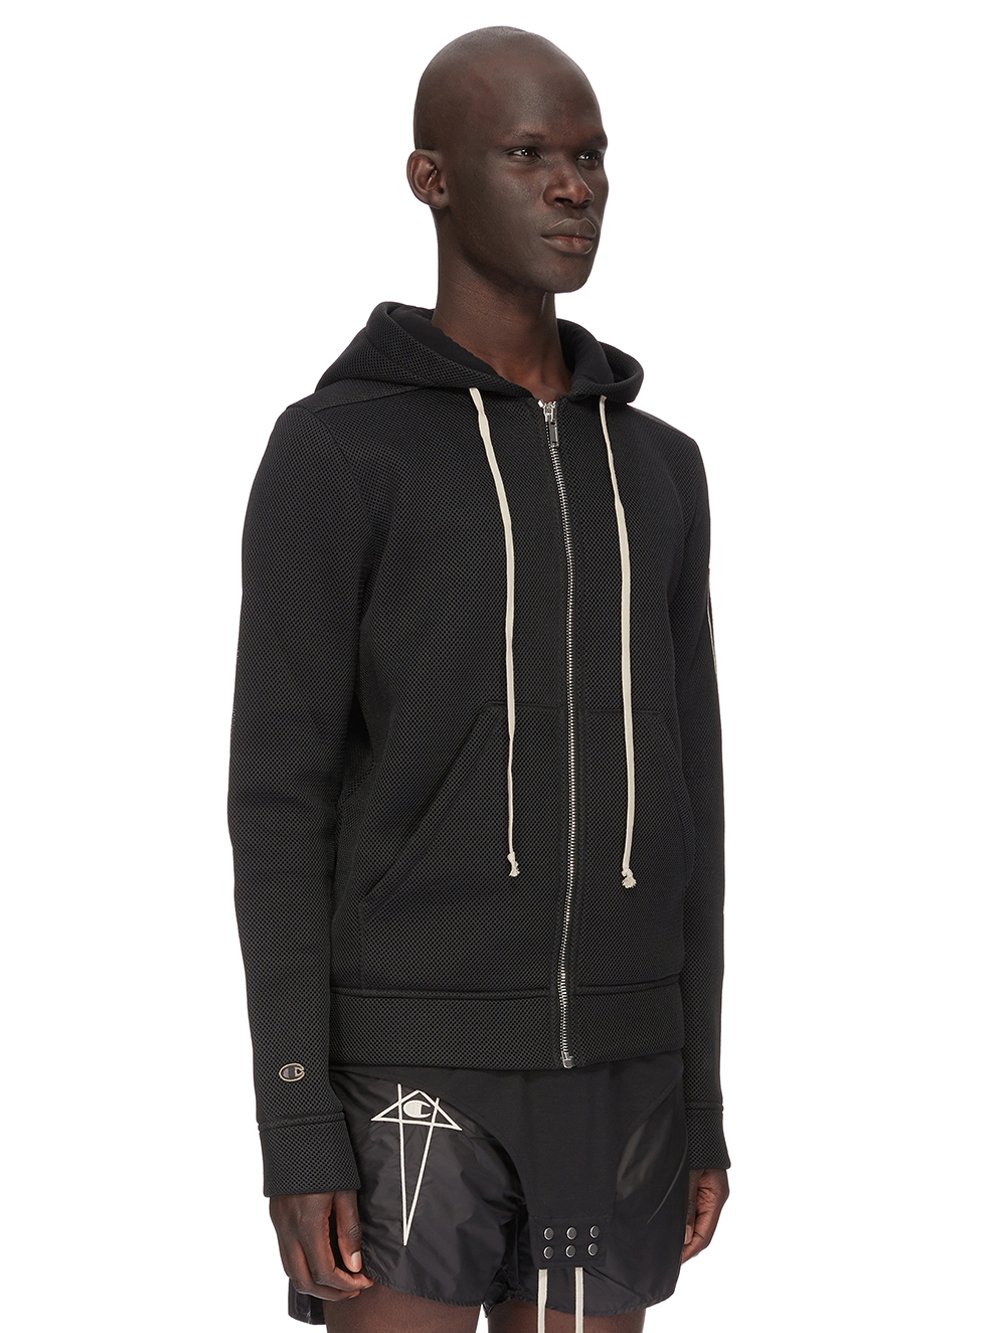 CHAMPION X RICK OWENS JASON'S HOODIE IN BLACK RECYCLED 3D MESH